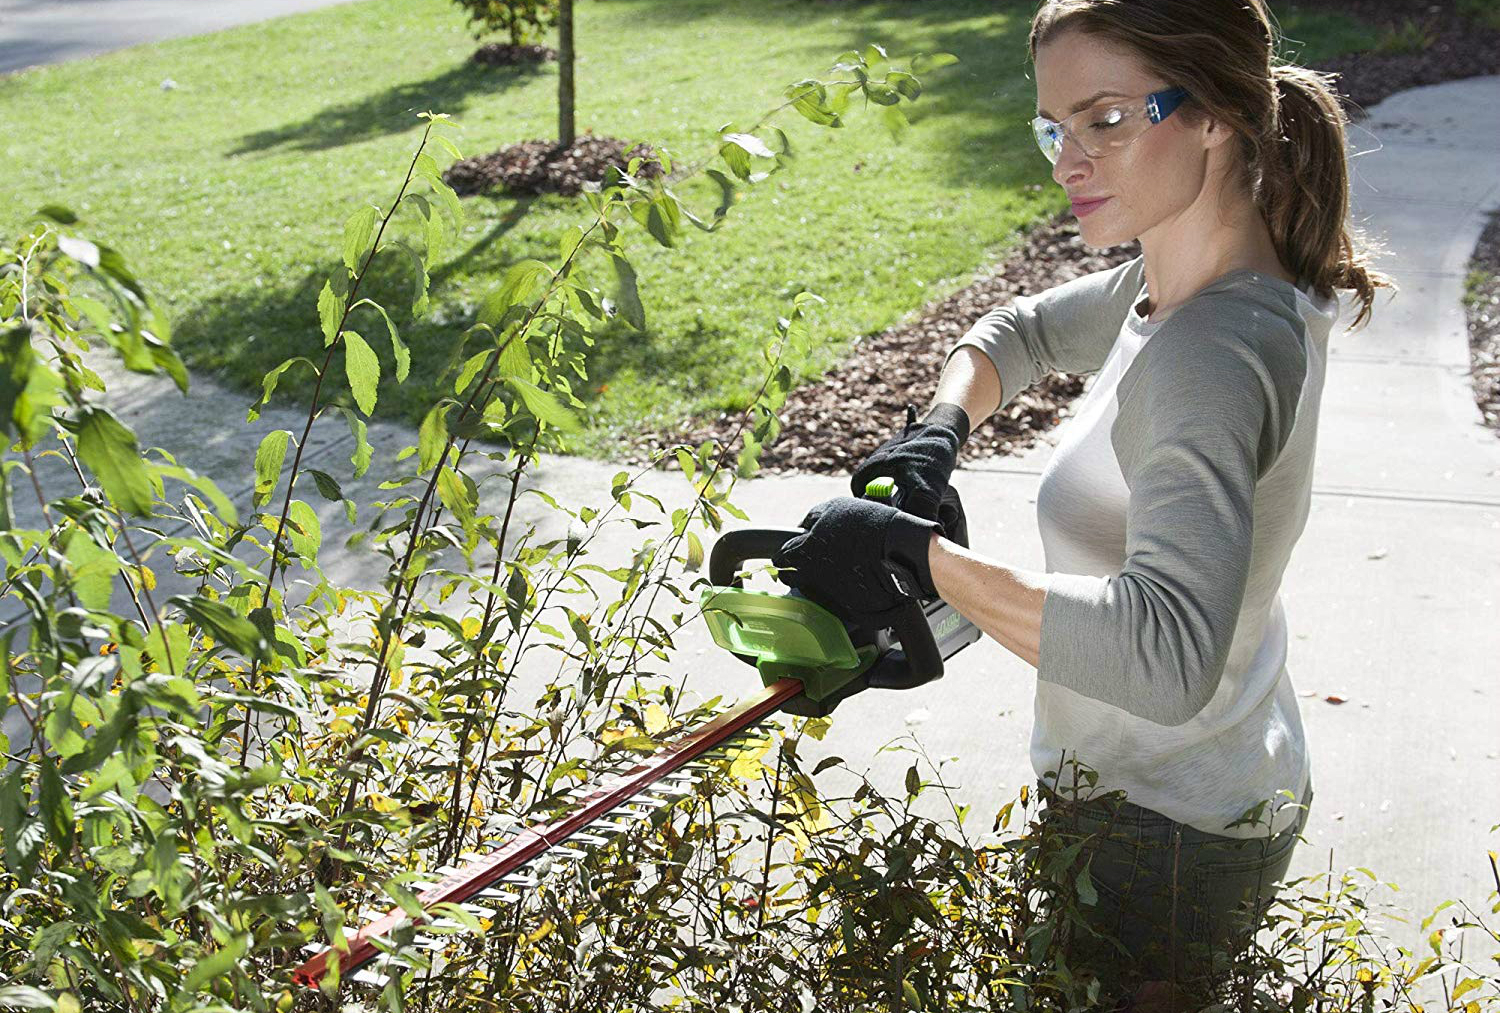 amazon deals on greenworks pressure washers and yard tools 24 inch 40v cordless hedge trimmer 2